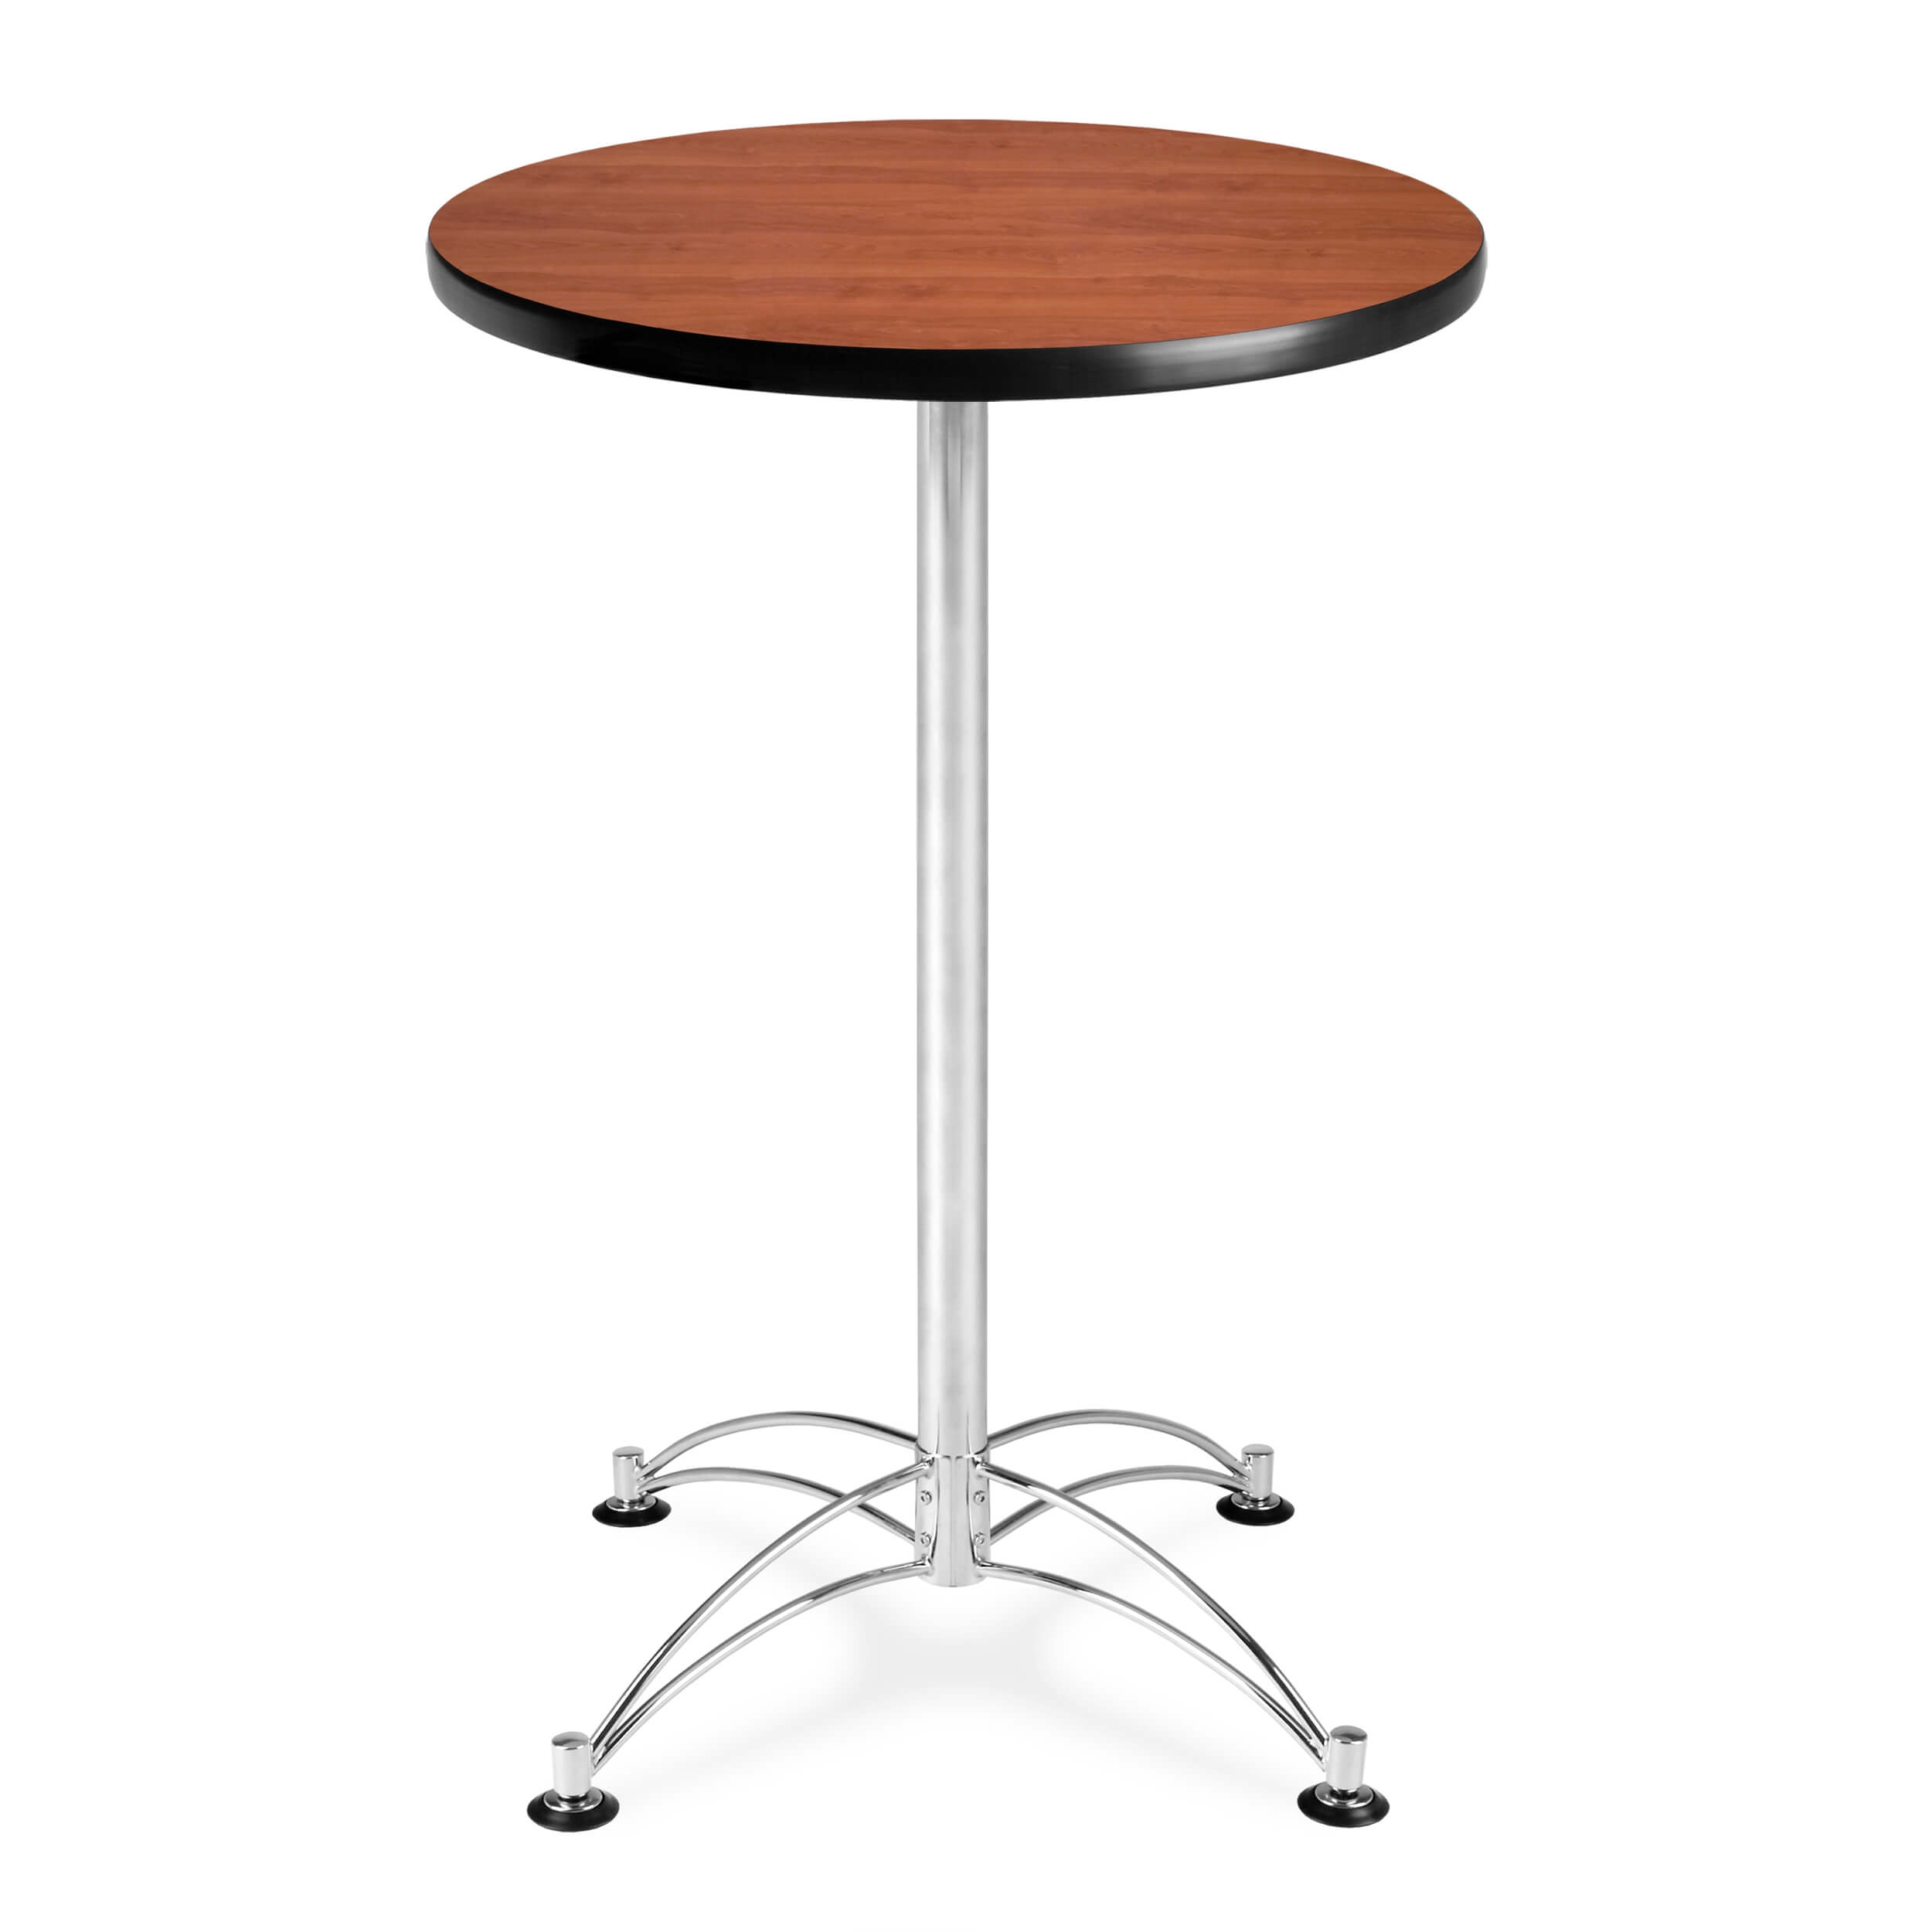 Cafe tables and chairs 24inch round cafe table